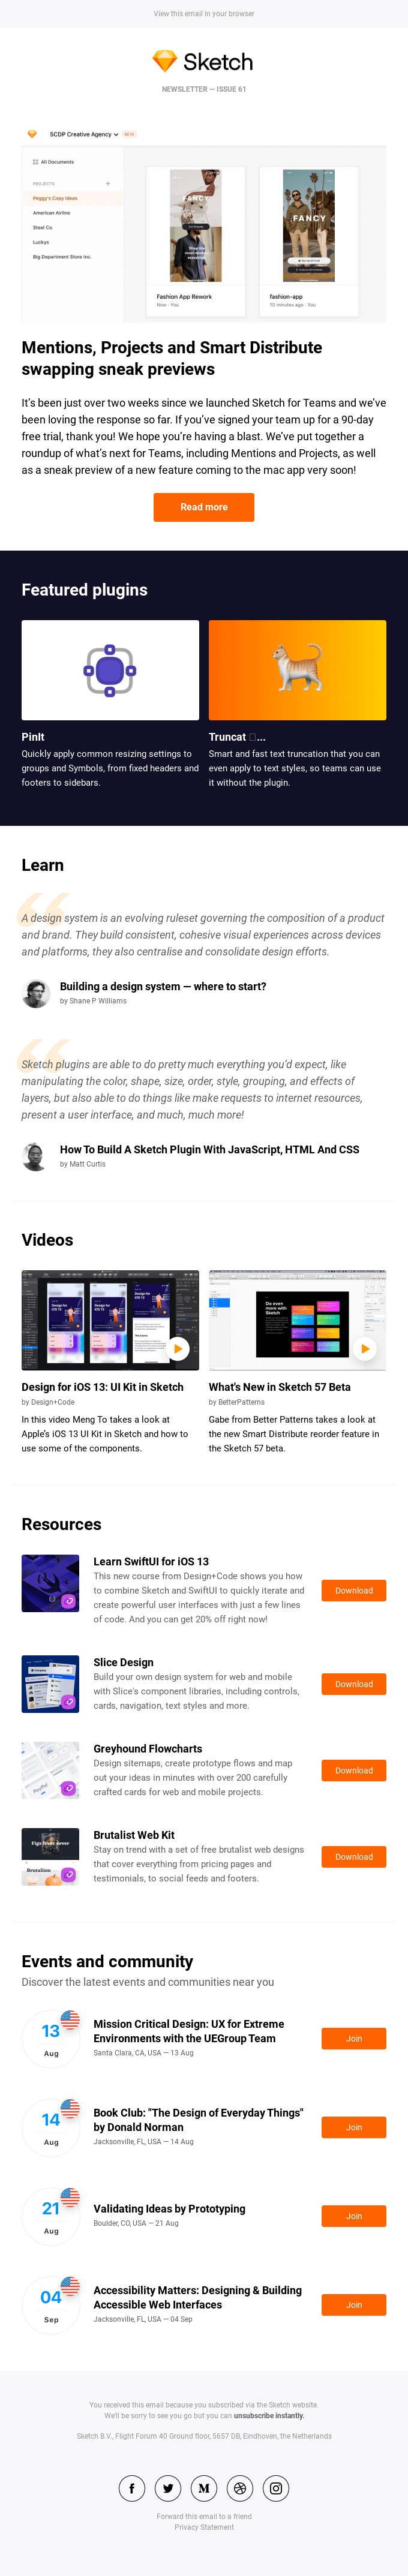 Sneak previews and a SwiftUI design course 👀 - Sketch Email Newsletter